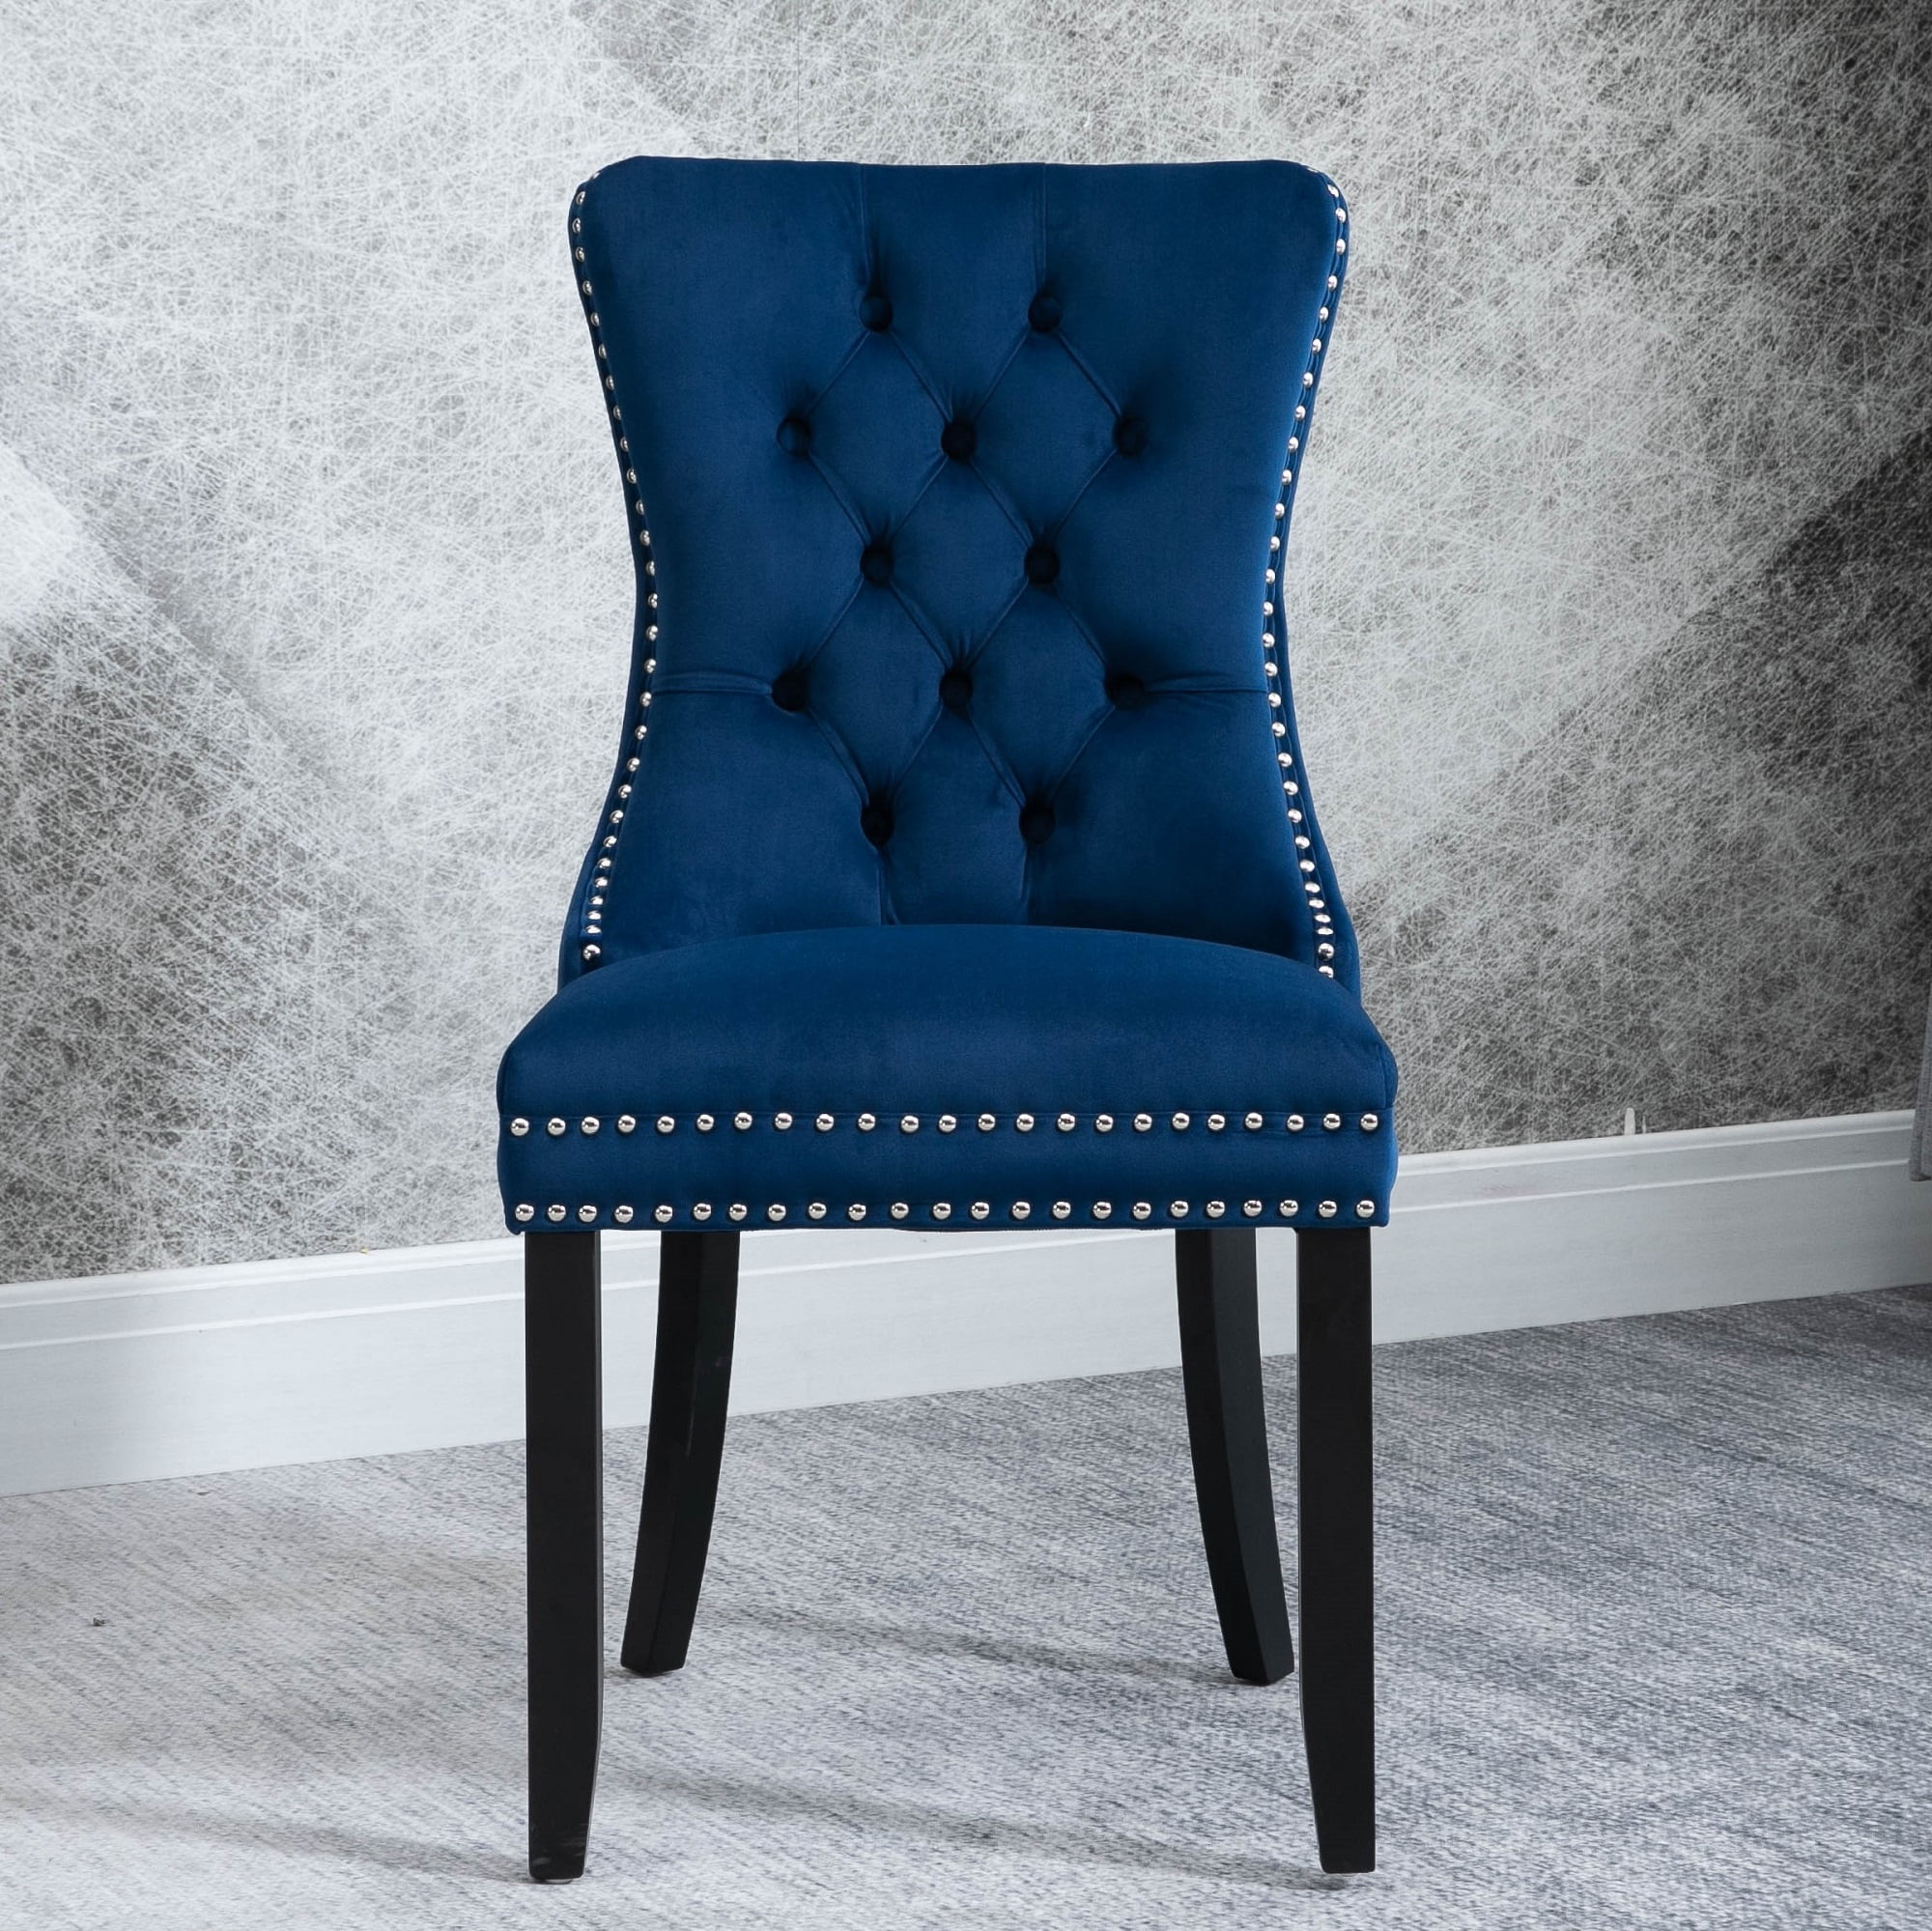 Upholstered Dining Chairs, Tufted Velvet Studded Dining Chair with